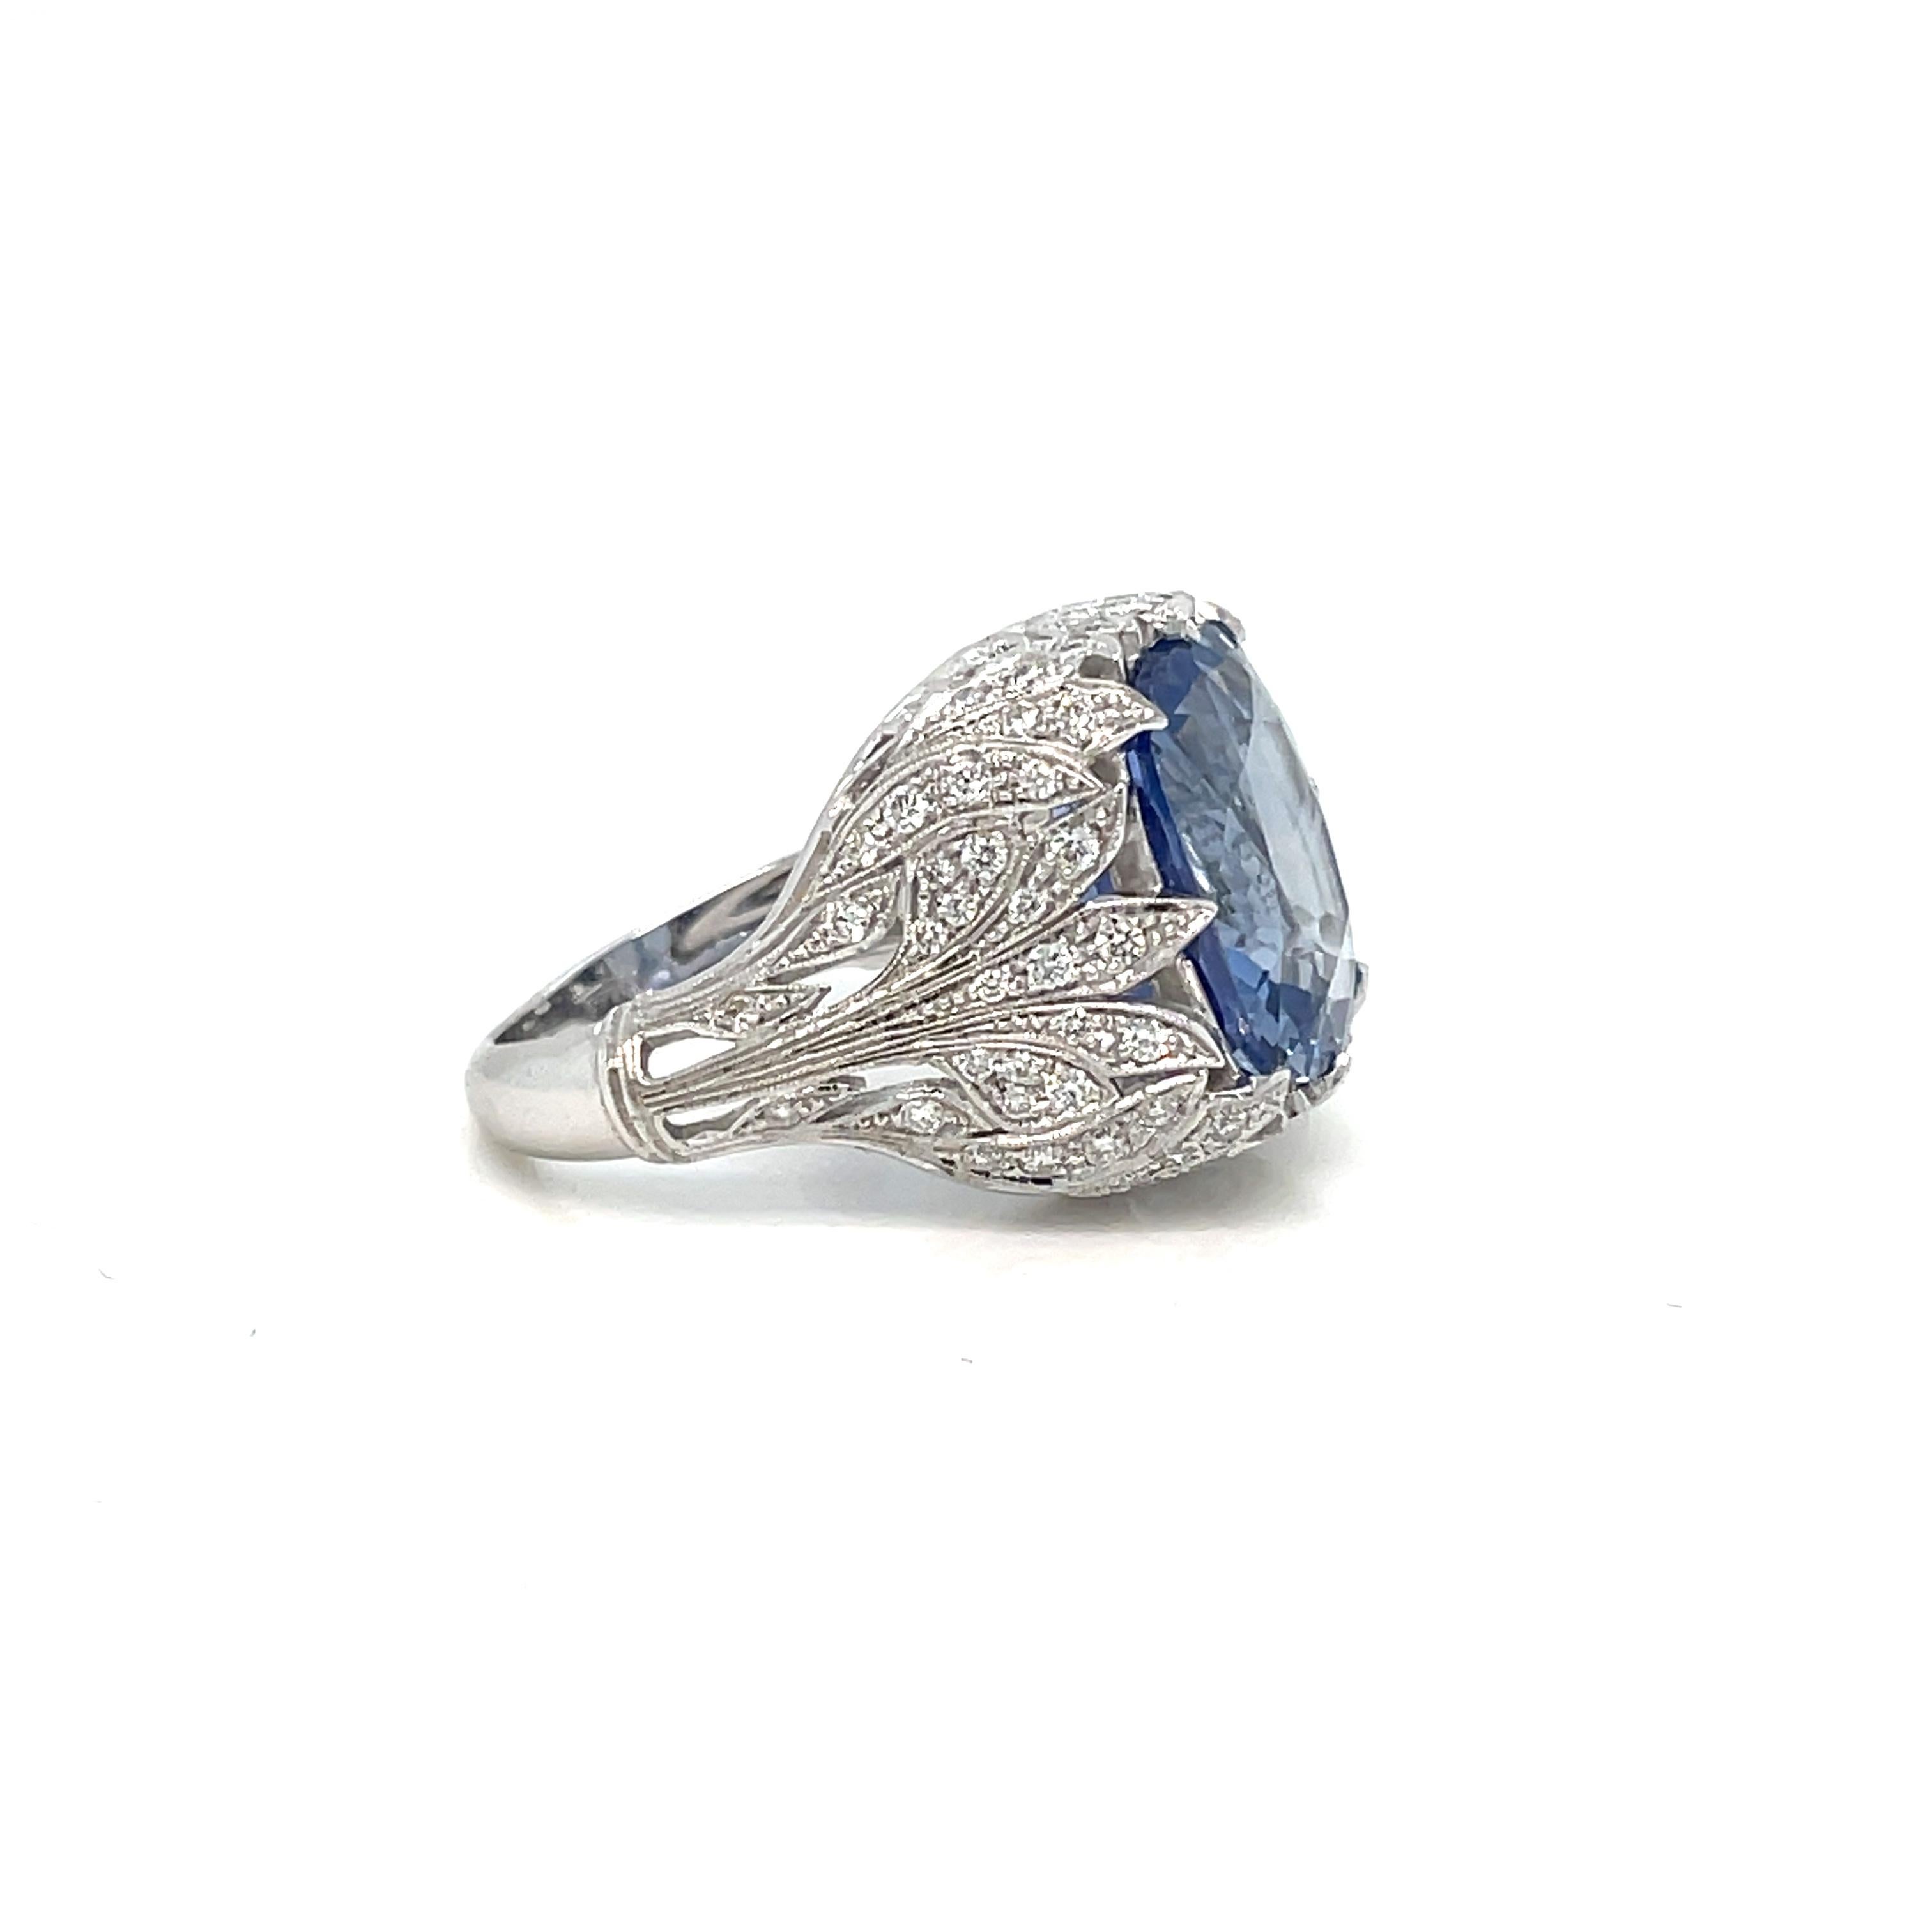 An exquisite genuine Art Deco style ring handcrafted in 18 kt gold by master jewelers, featuring an amazing rare vivid 12,24 carat  Natural Ceylon Sapphire cushion-shape, surrounded by 0,70 carats of round brilliant cut diamonds - VVS clarity, G